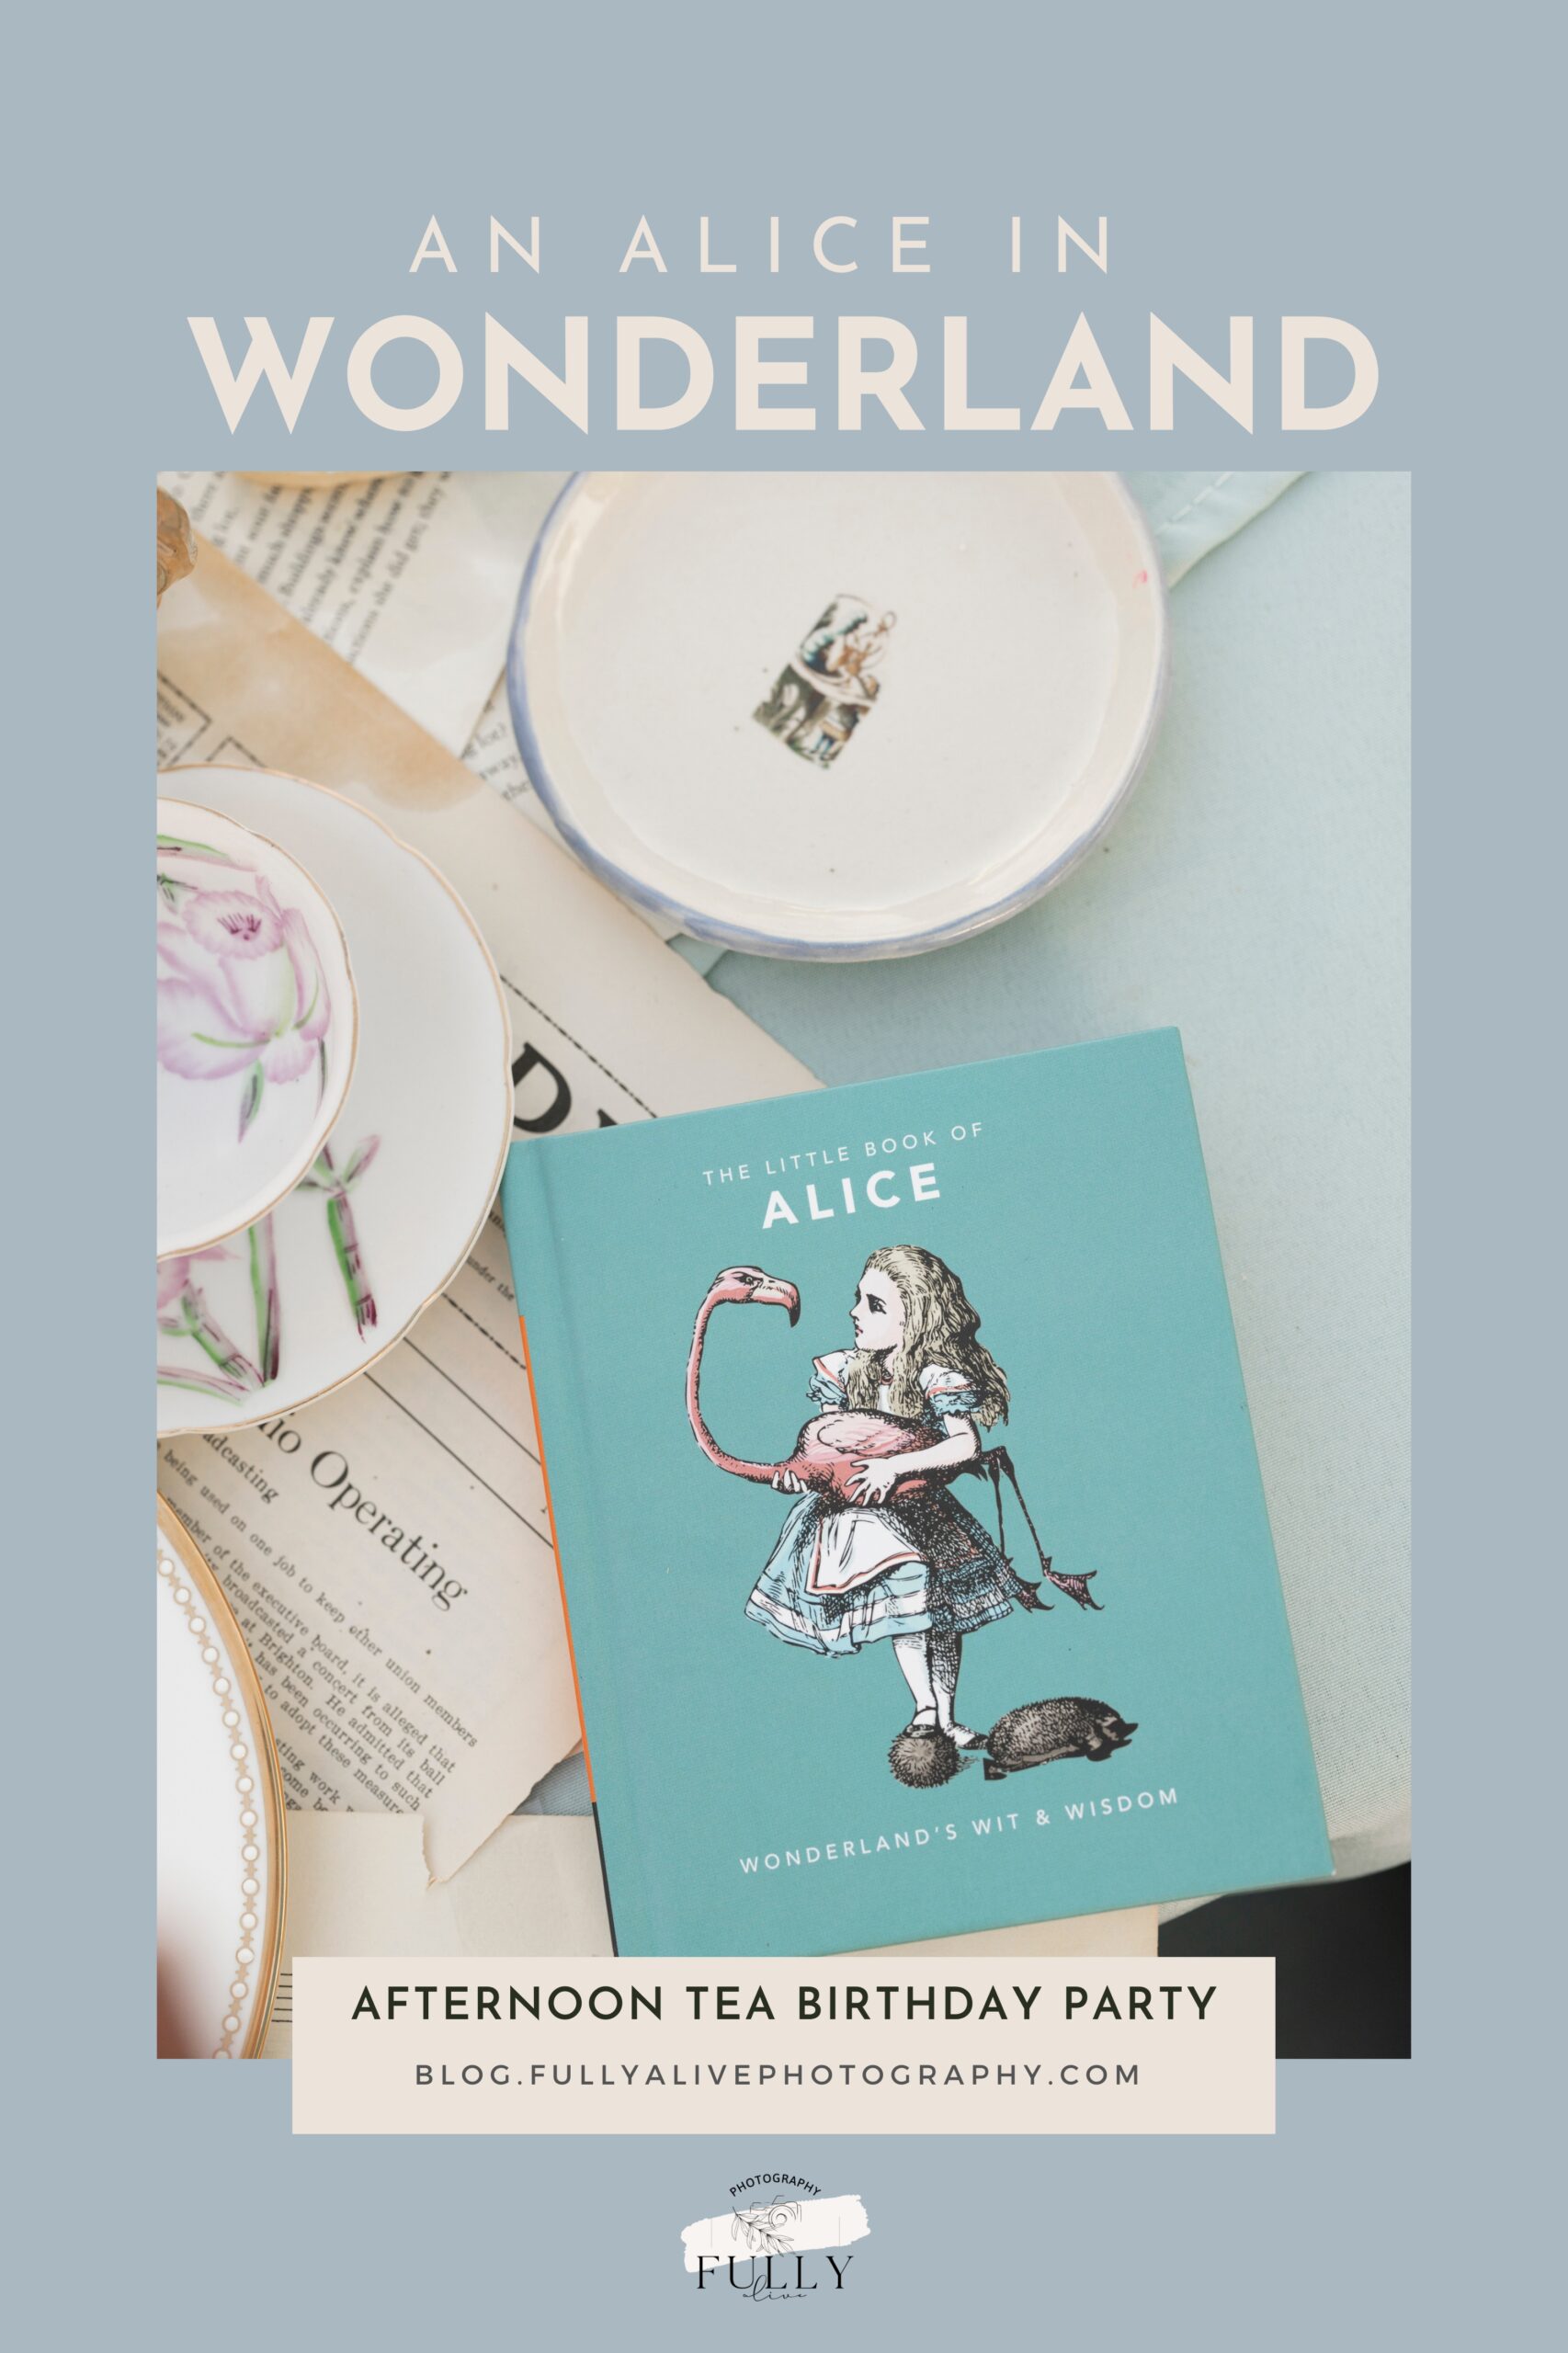 An Alice In Wonderland Afternoon Tea Birthday Party